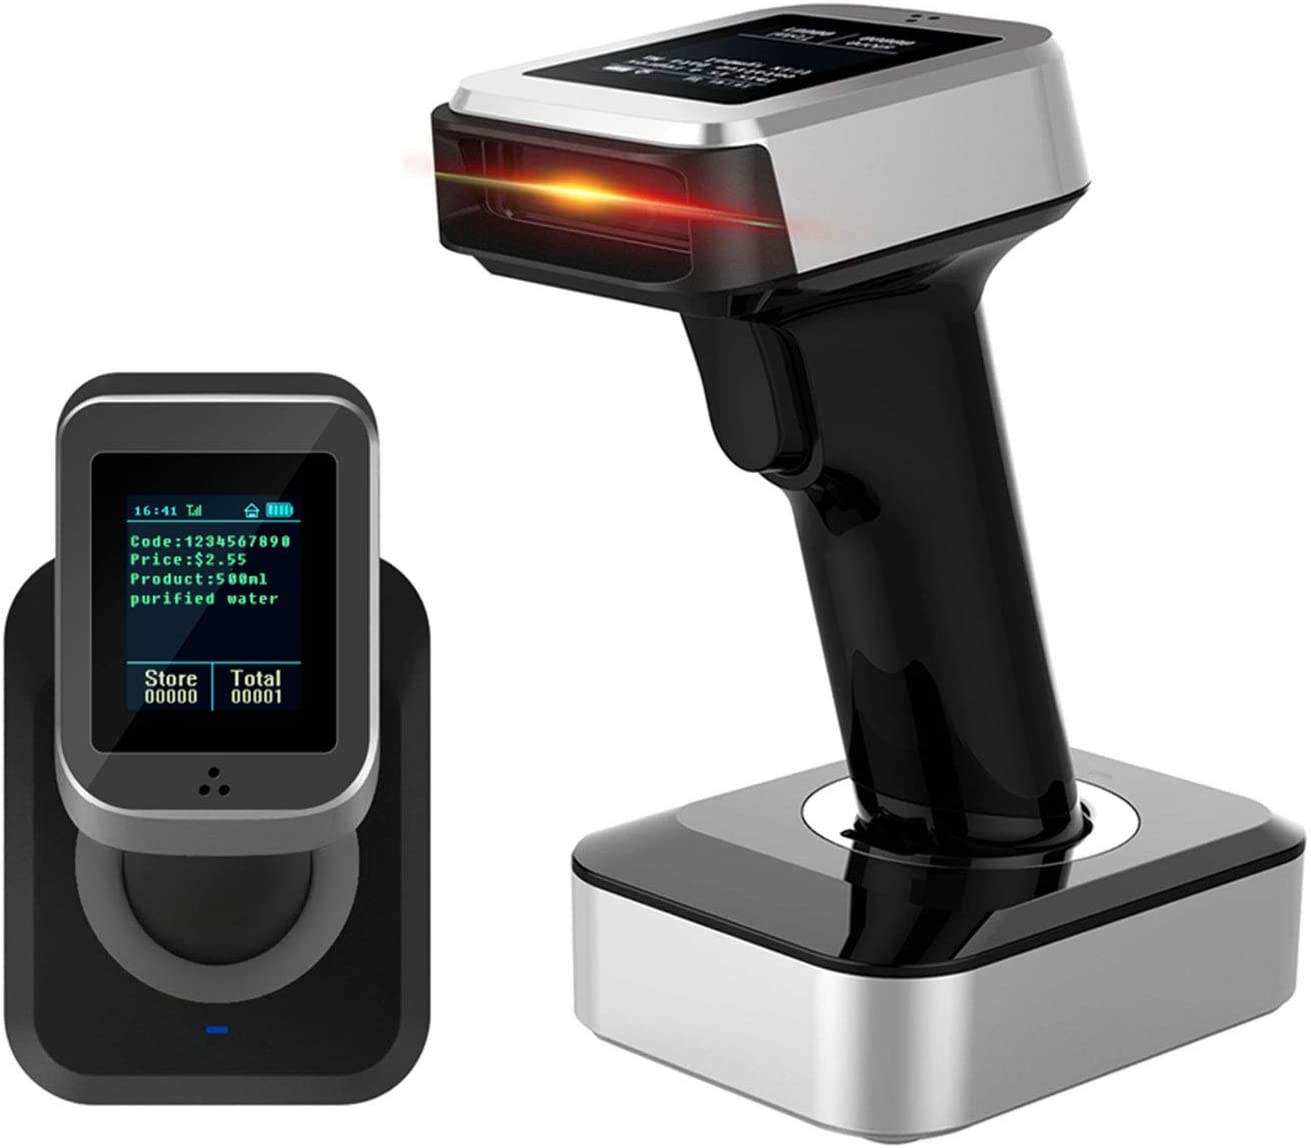 1D Bluetooth Mini Laser Barcode Scanner,Symcode USB Portable Handheld 1D Barcode Scanner Reader for POS/Android/iOS/iMac/Ipad 